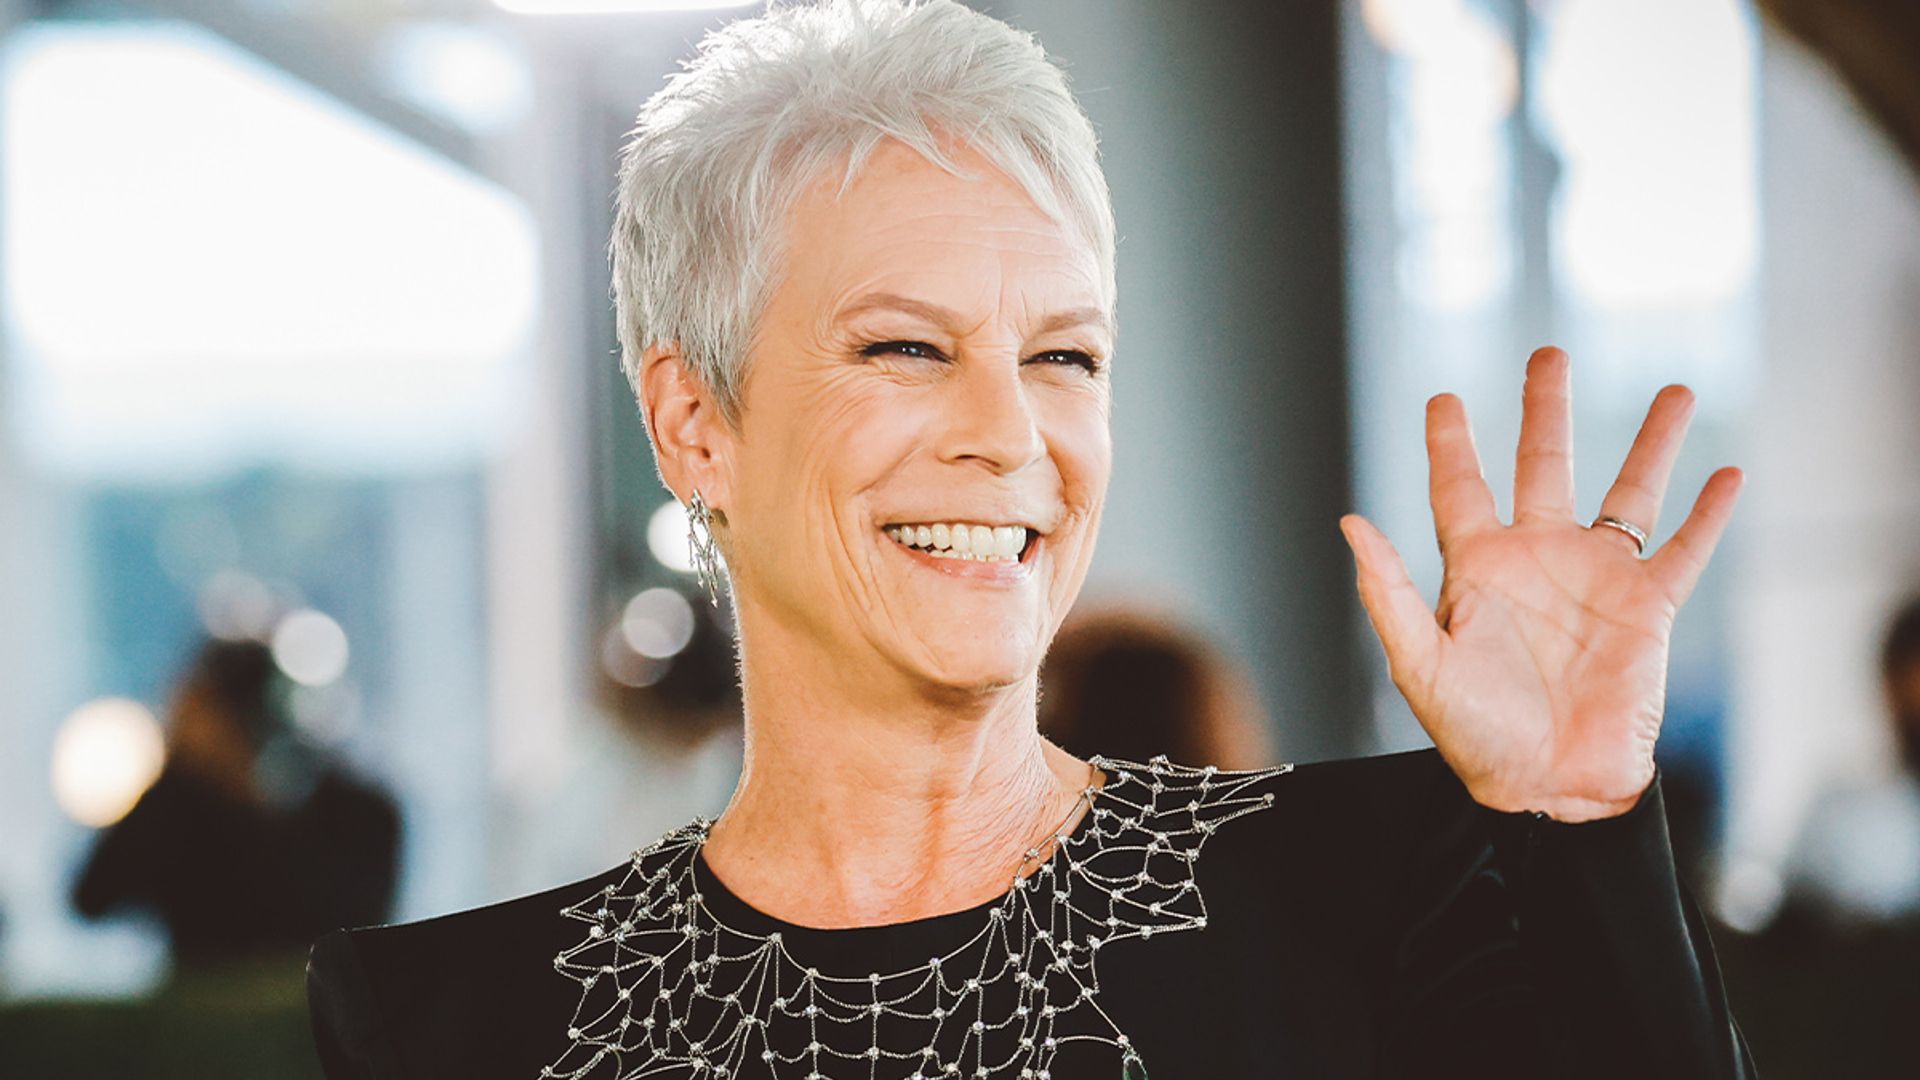 Jamie Lee Curtis' glorious home with husband Christopher Guest is full of inspiration